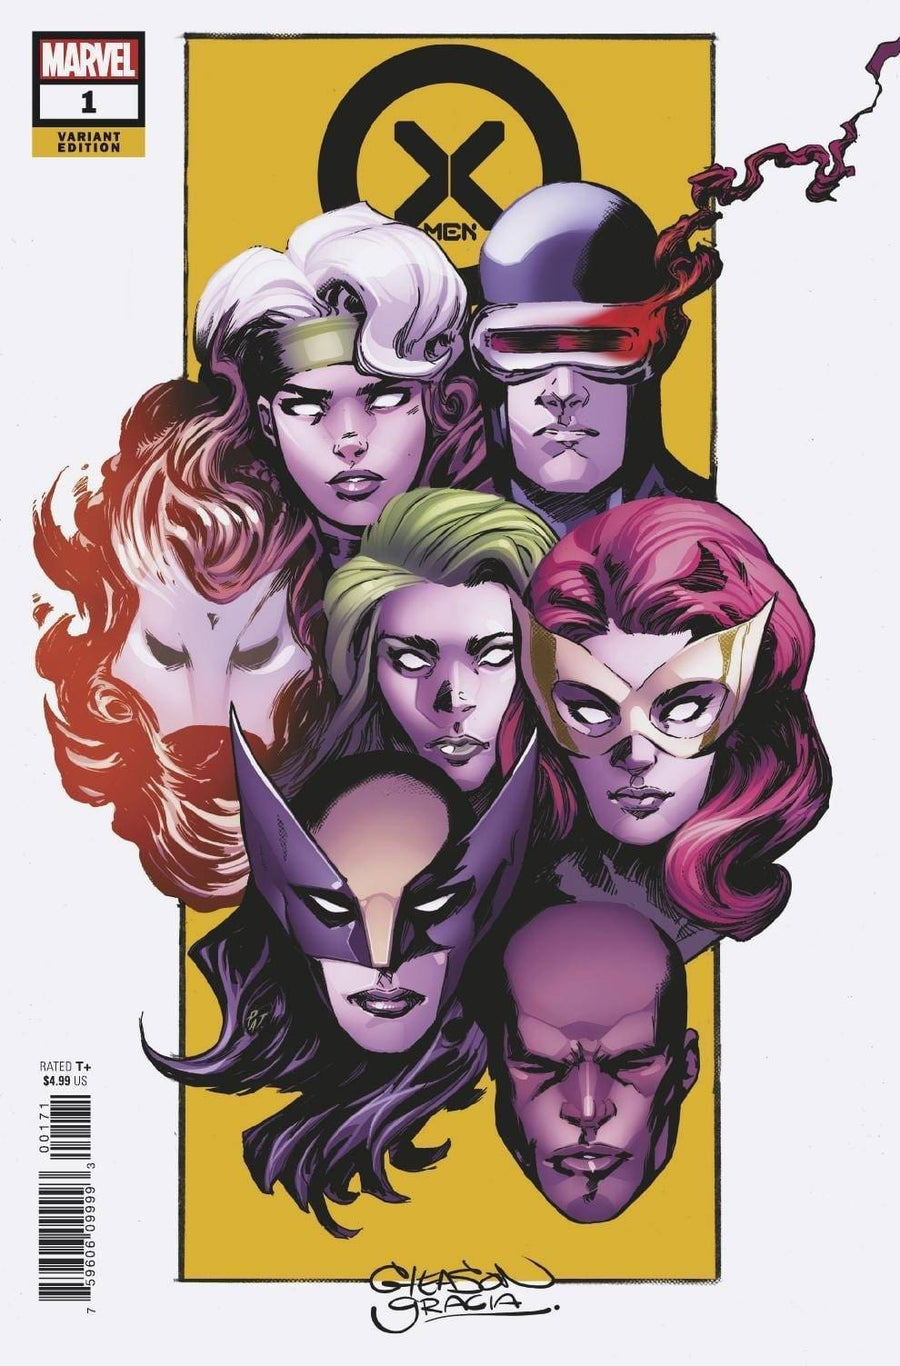 X-MEN #1 MIKE MAYHEW STUDIO VARIANT Set of COVER A Trade Dress and COVER B 